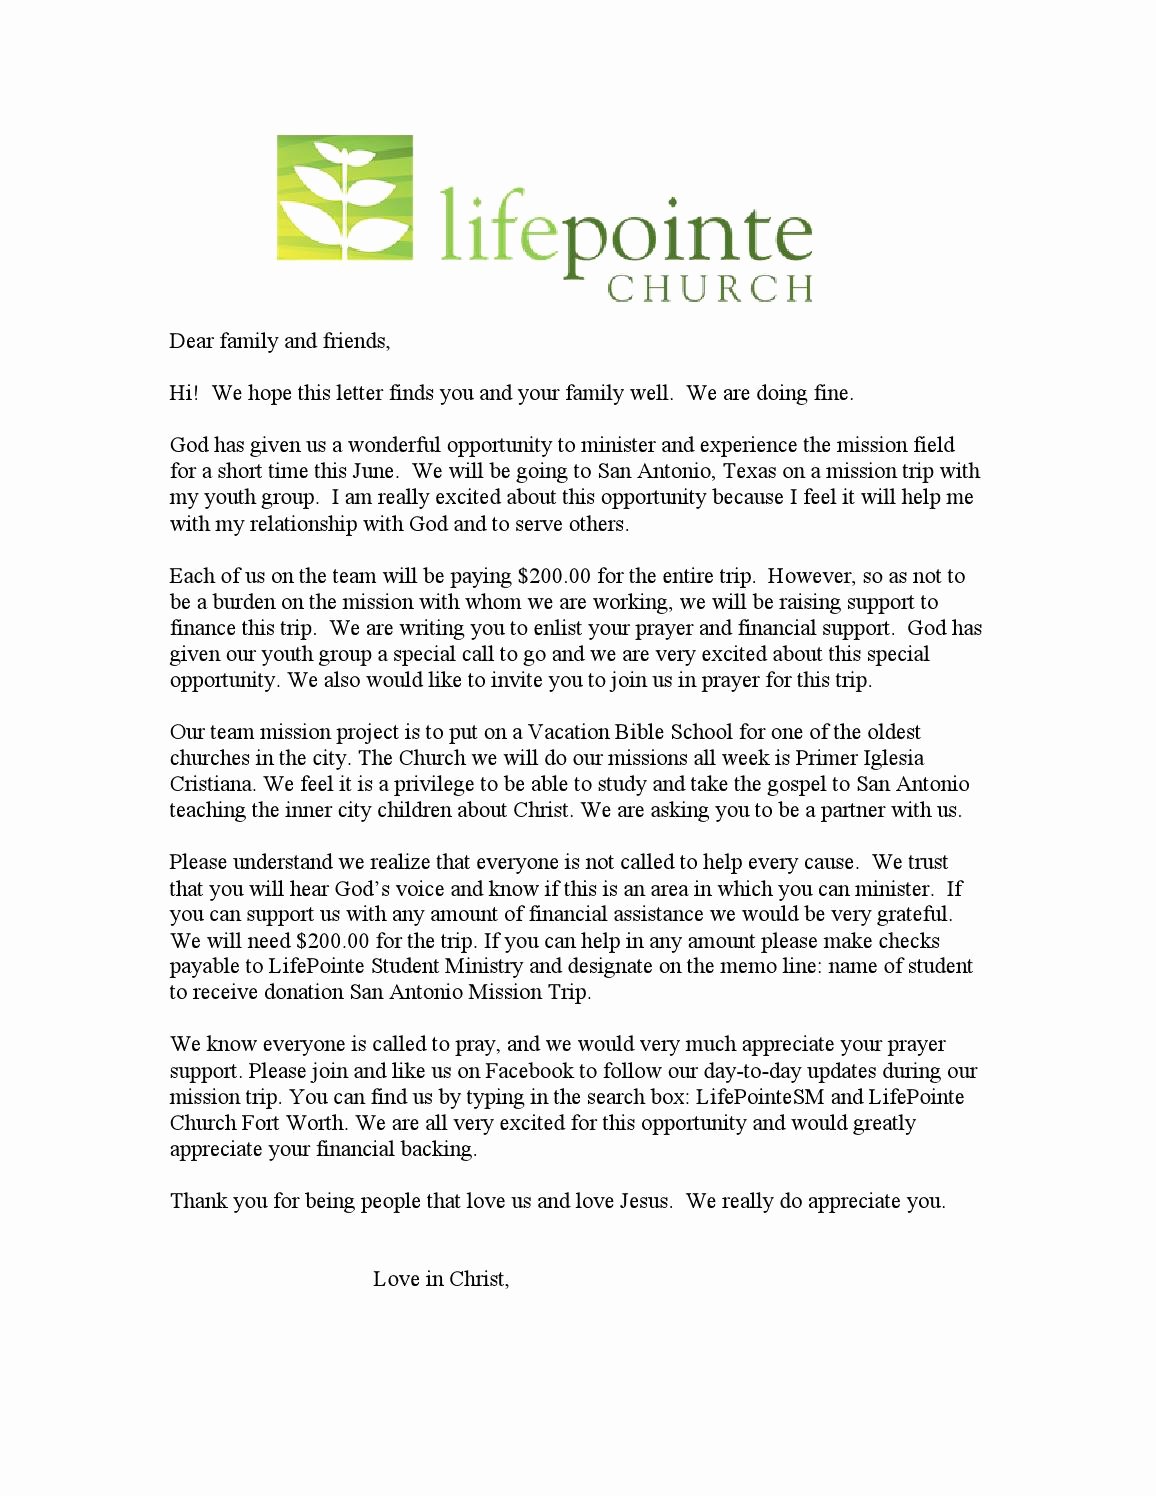 Fundraising Letter for Mission Trip Inspirational Sa Mission Trip 2015 Donation Letter by Charles Bernal issuu